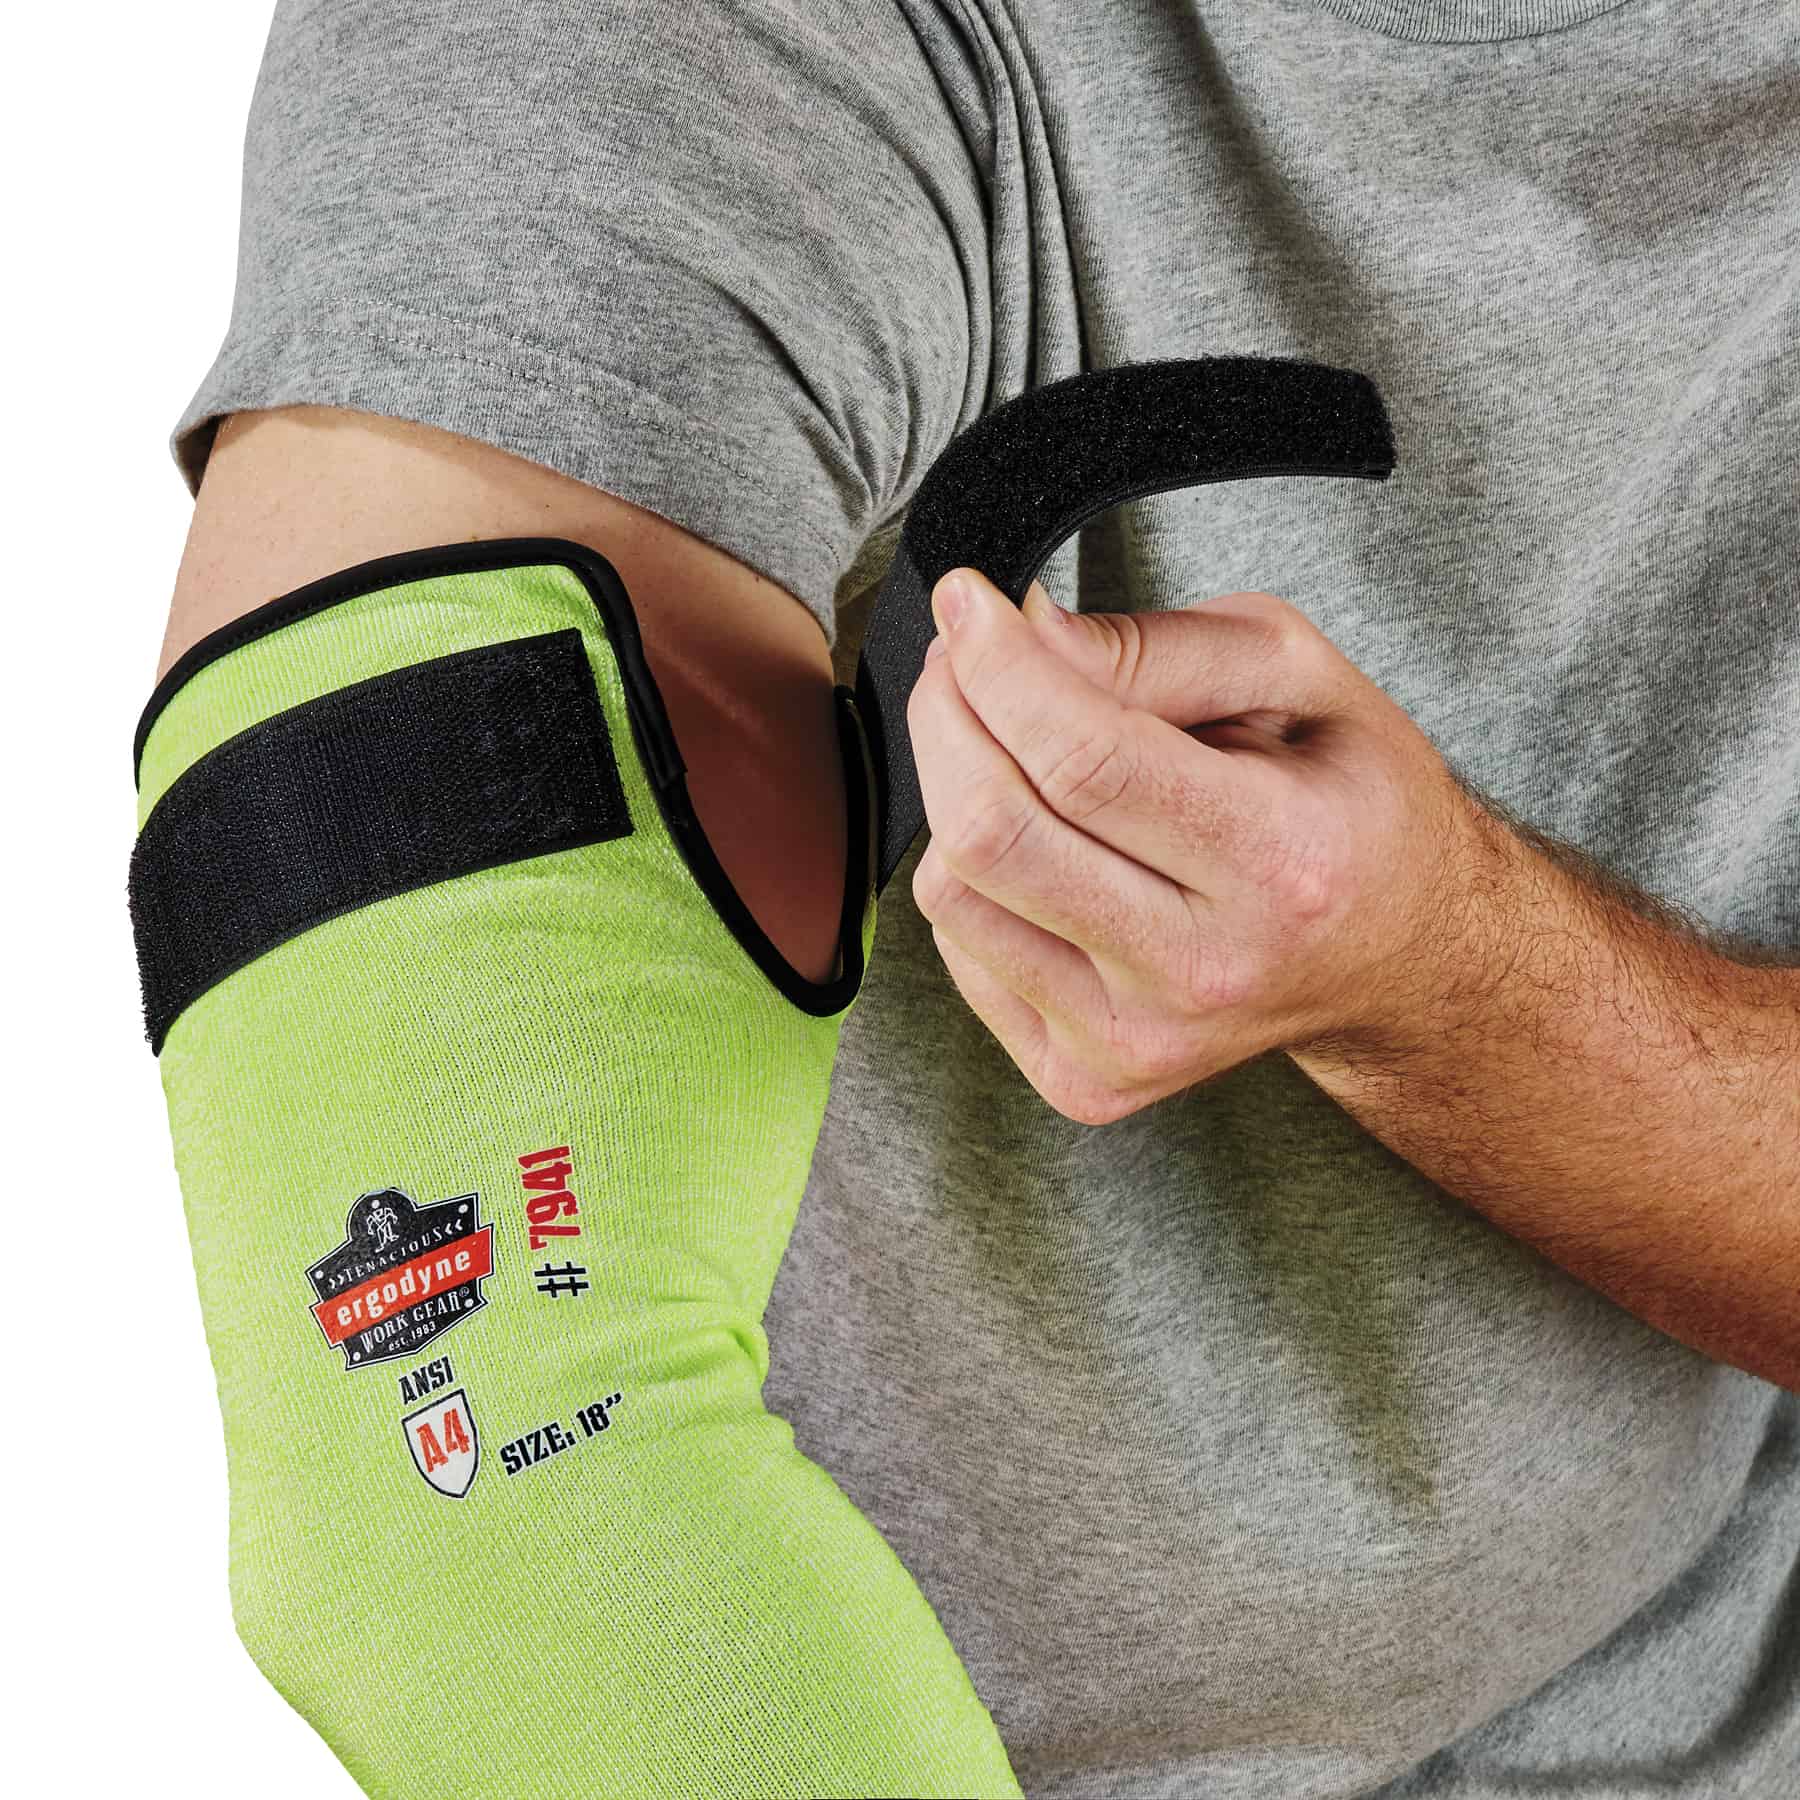 ANSI/ISEA 105-2016 Level A4 Cut-Resistant Protective Arm Sleeves